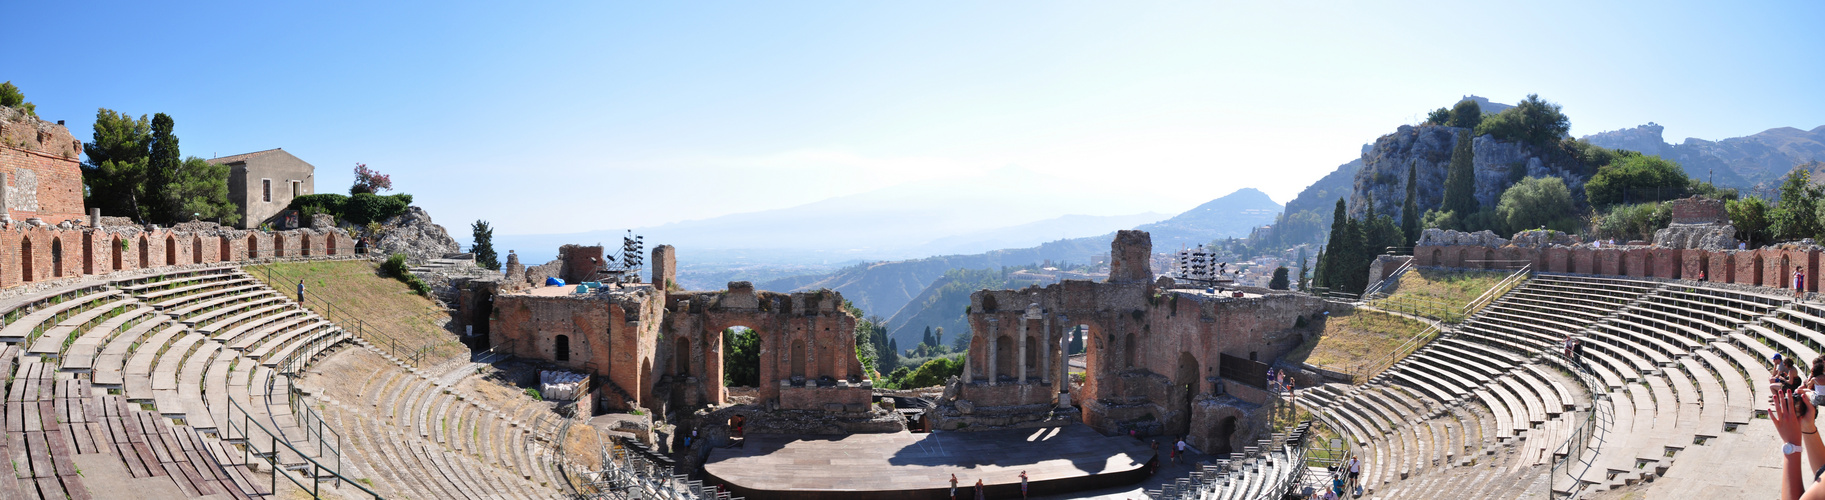 Griechisches Theater in Taormina (Teatro Greco)